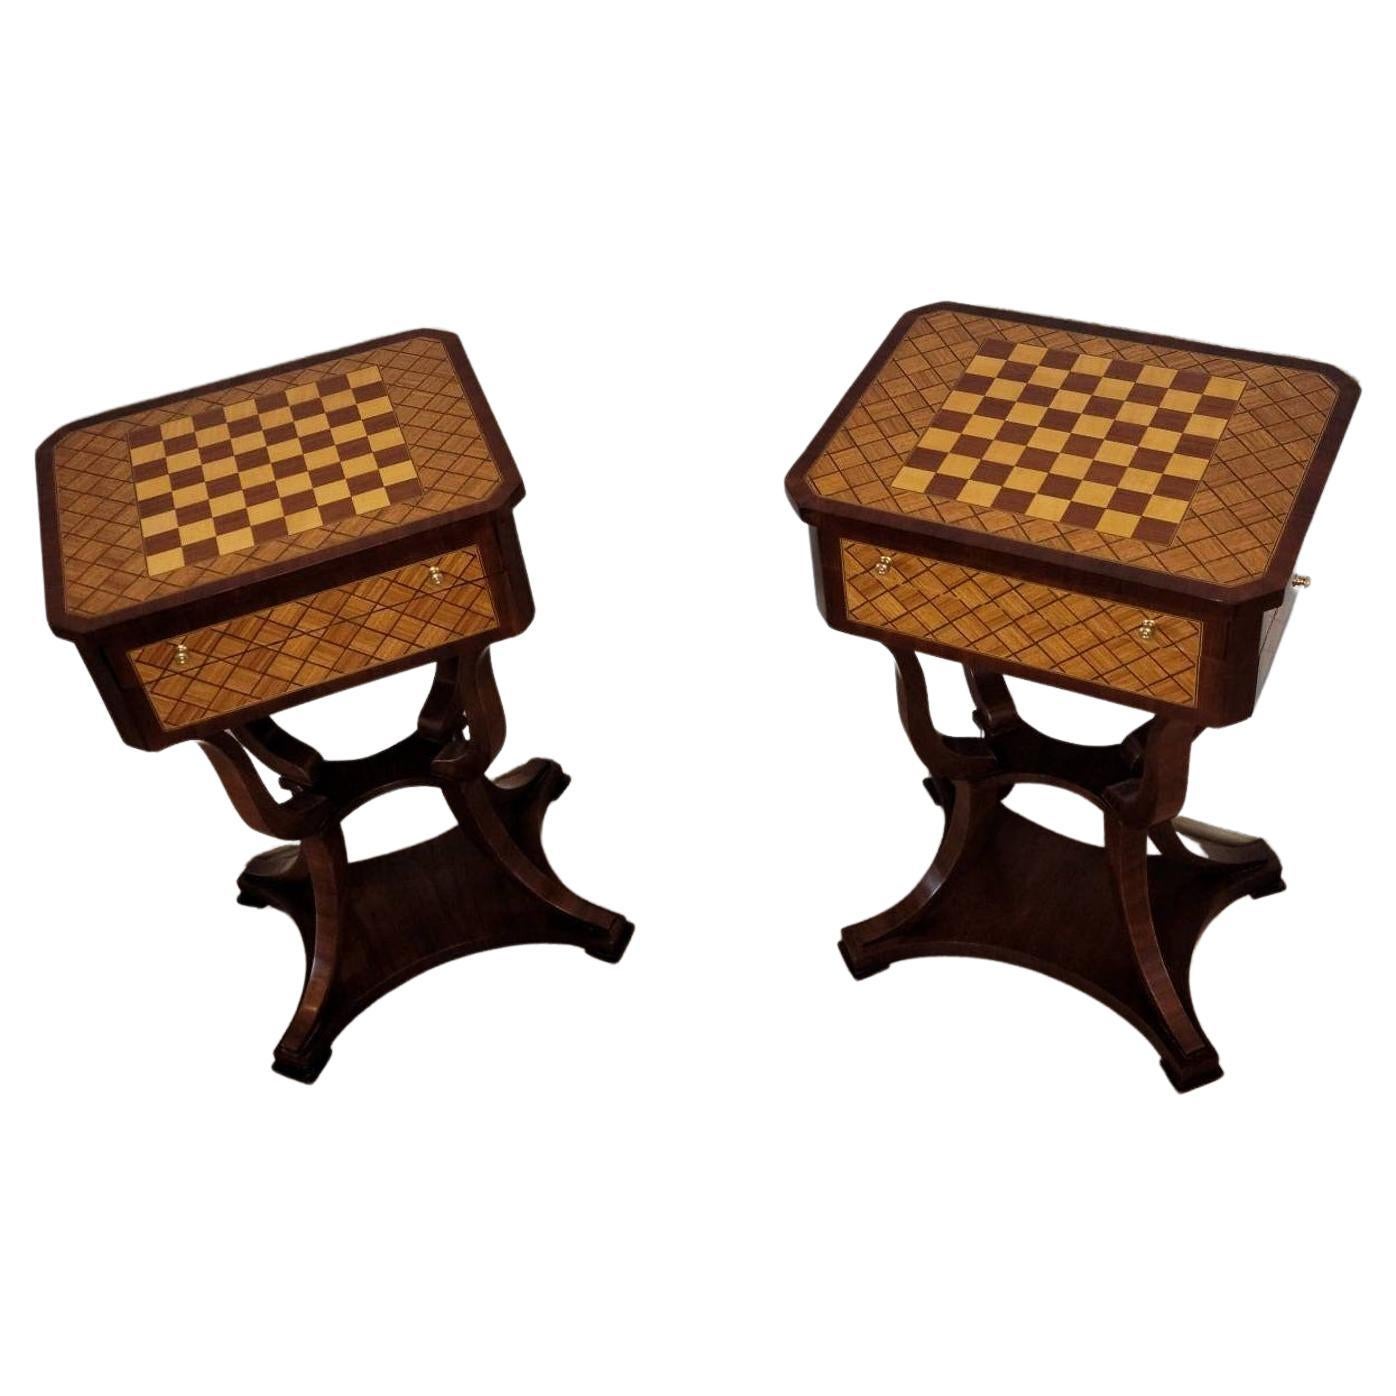 Pair of Italian Neoclassical Chessboard Parquetry Inlaid Tables For Sale